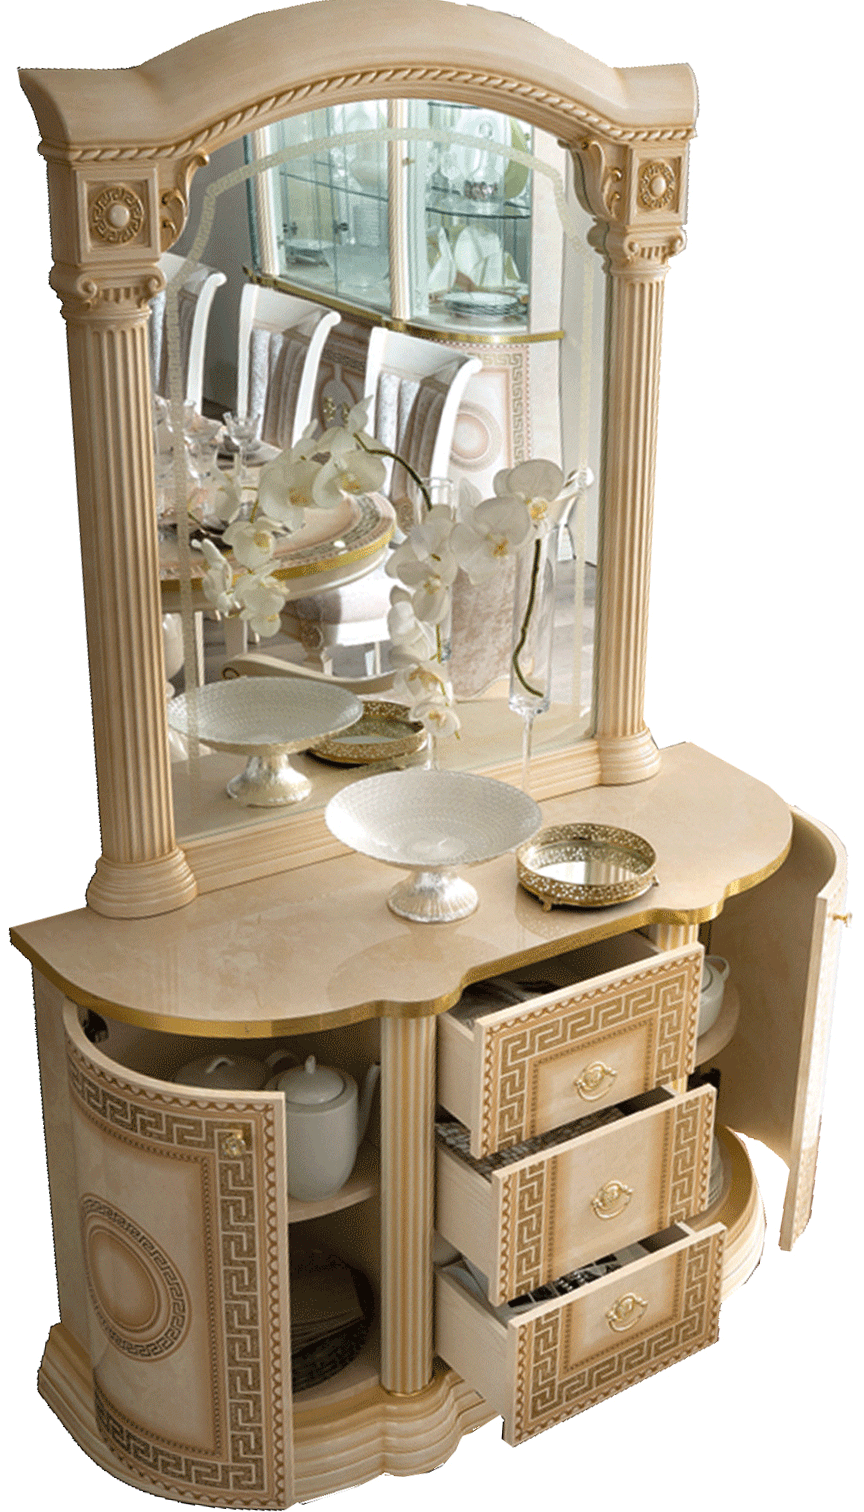 Brands Camel Gold Collection, Italy Aida 2 door Buffet Ivory